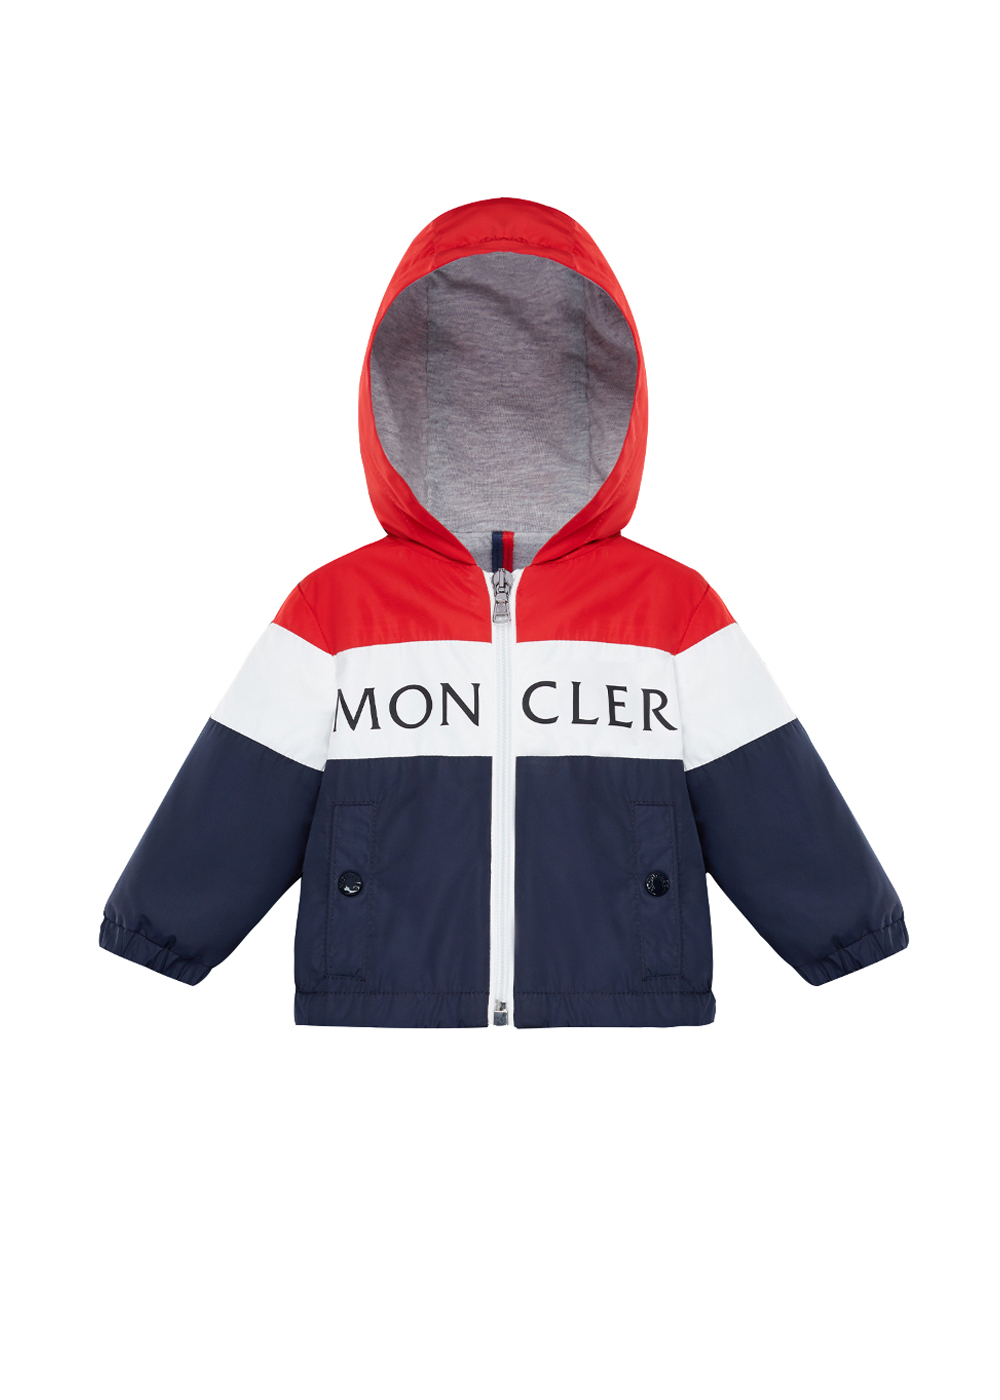 Featured image for “Moncler Giacca Dard”